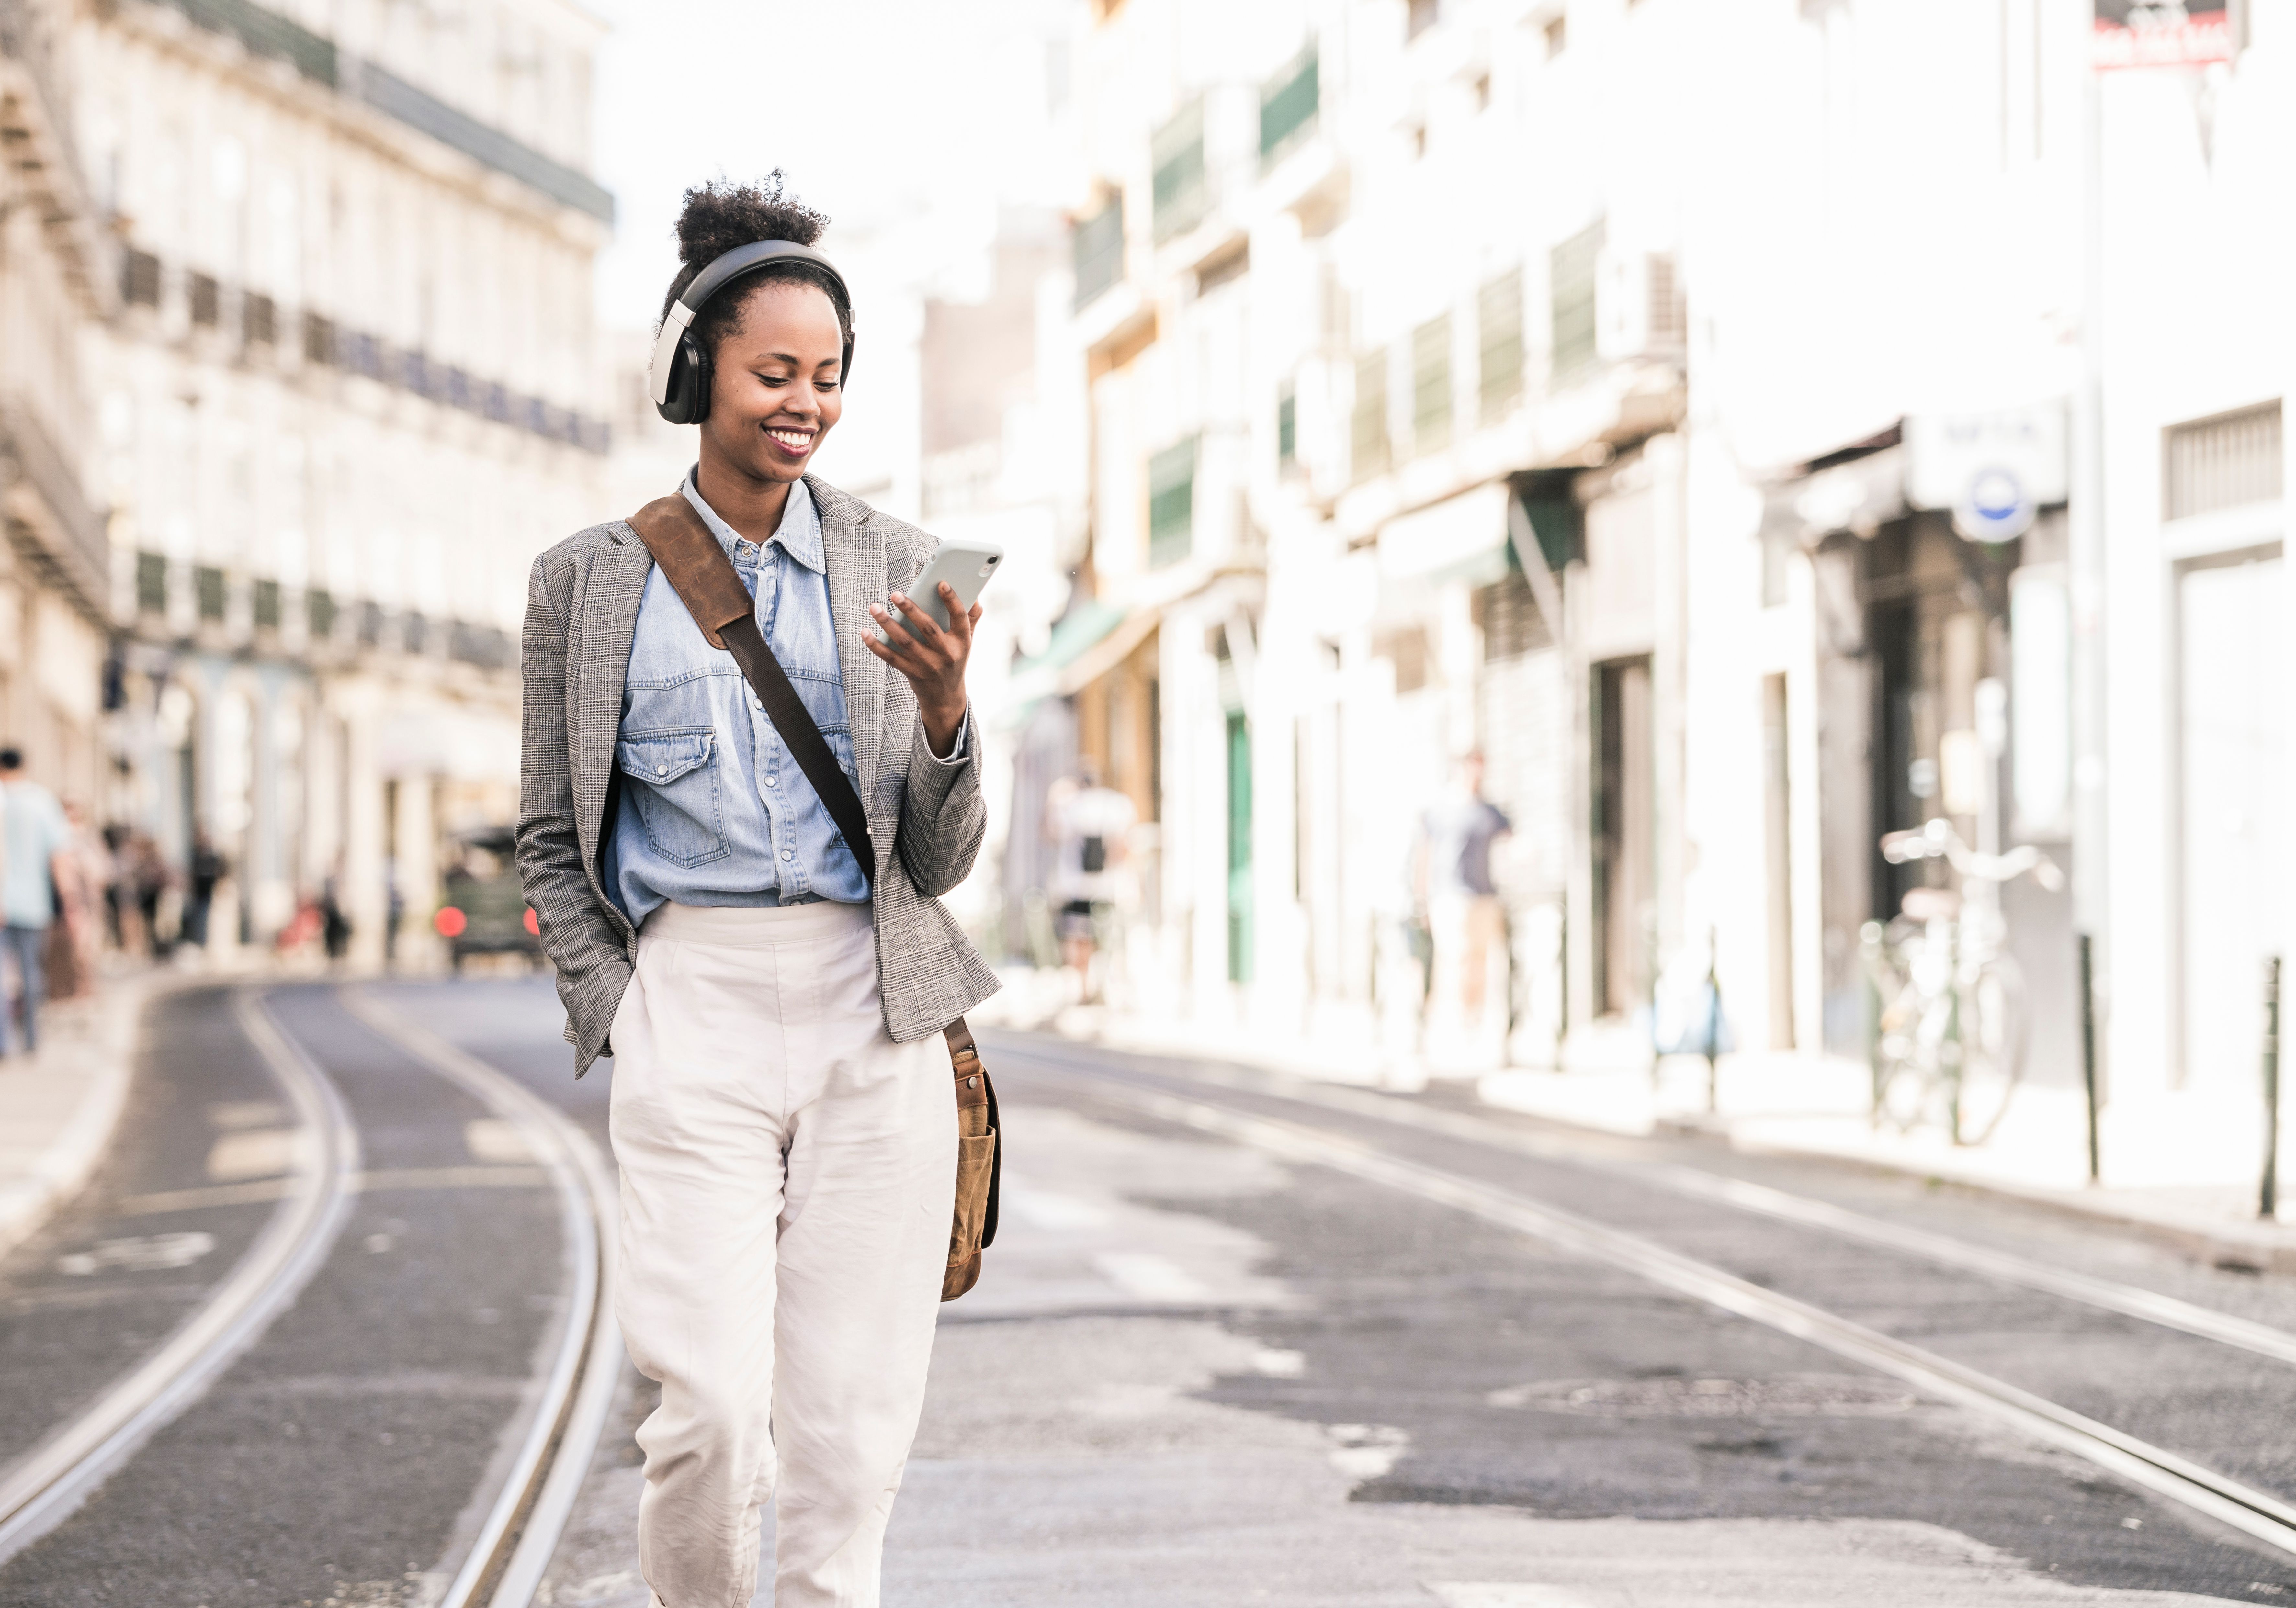 A person wearing headphones smiles at their mobile device as they walk down a road.